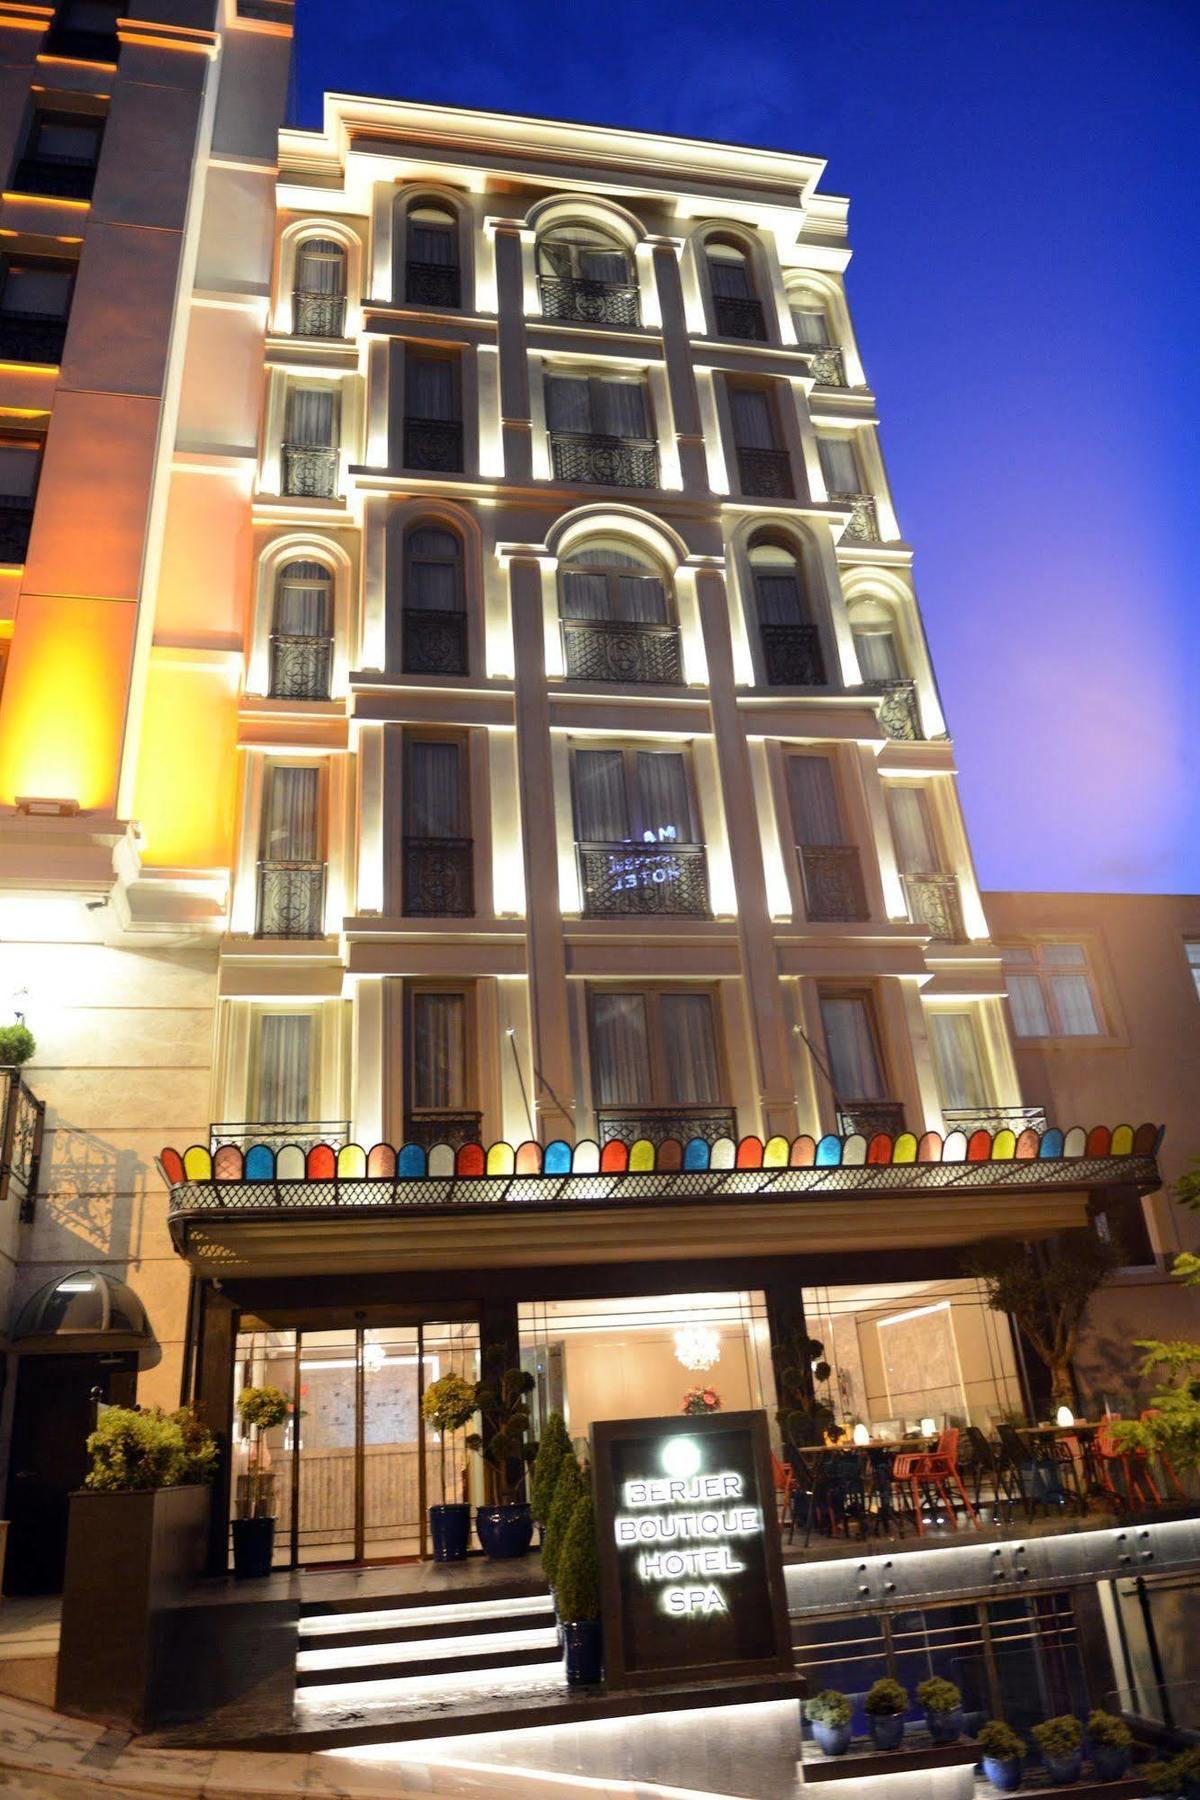 Berjer Boutique Hotel & Spa Istanbul Exterior photo